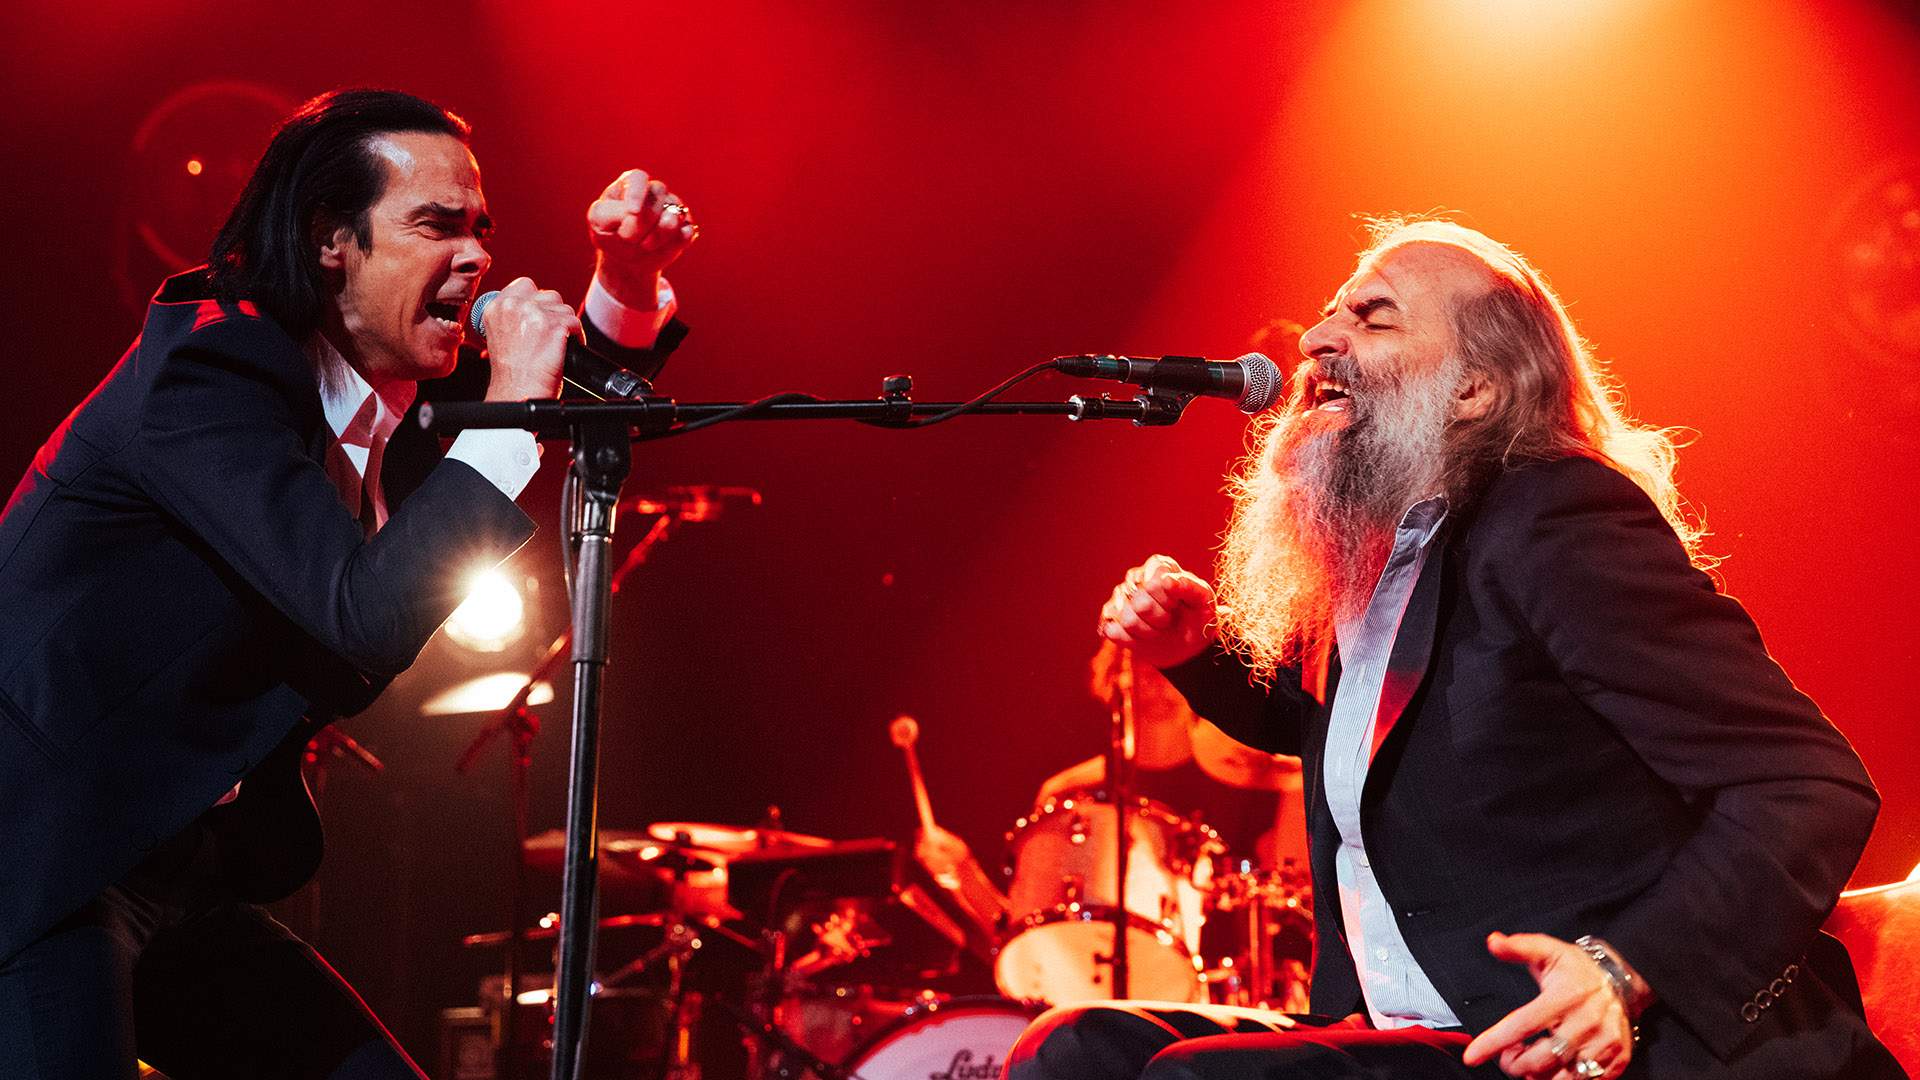 Nick Cave and Warren Ellis Have Announced Their Full 2022 Australian Tour Dates